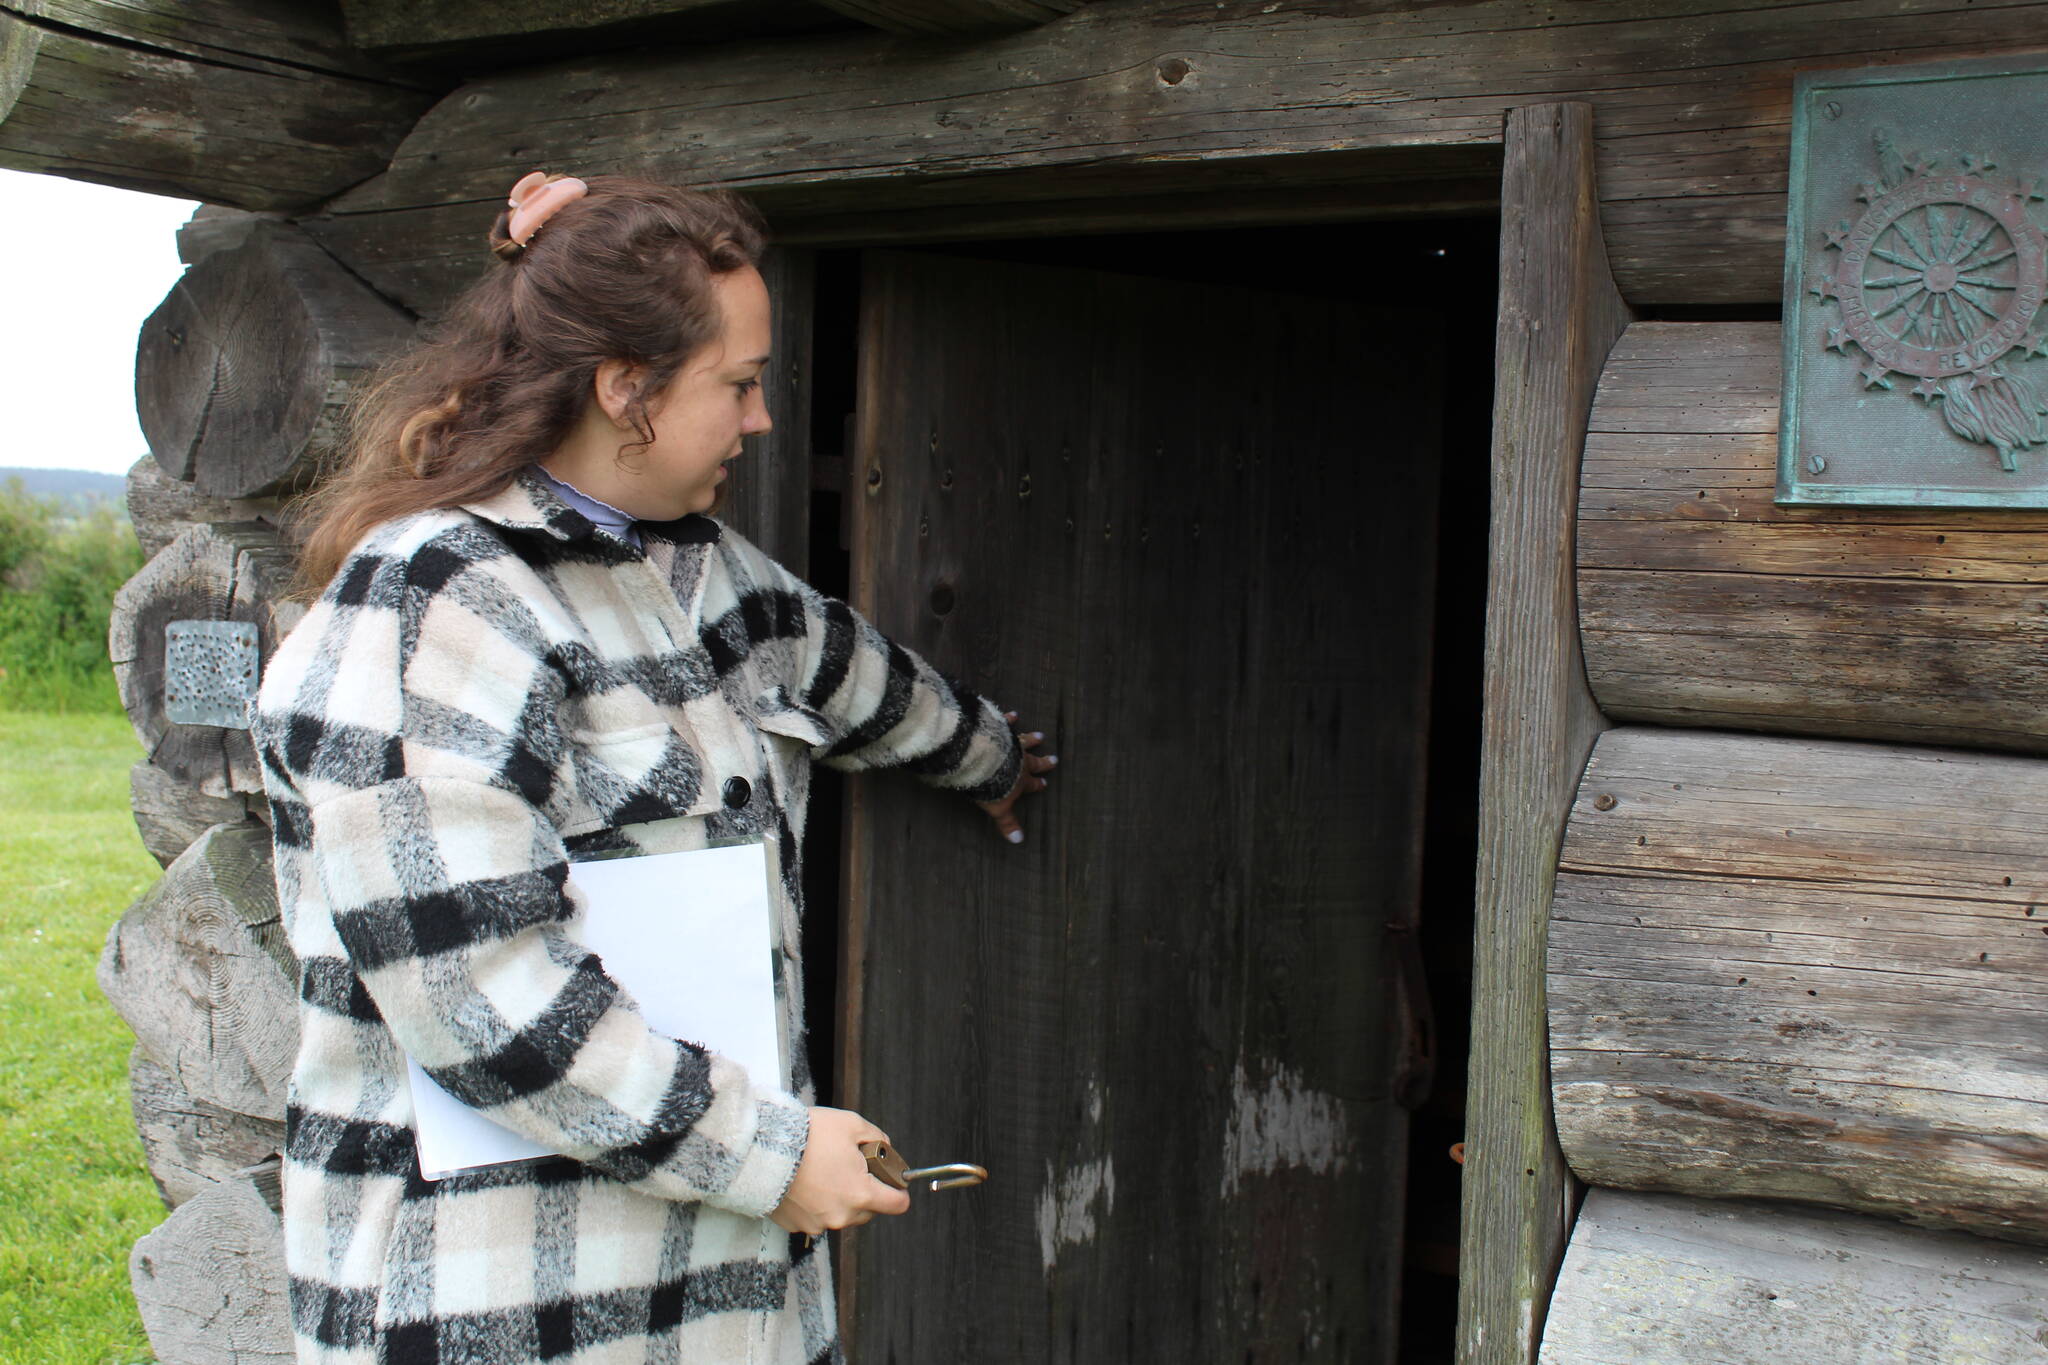 Reserve education and outreach coordinator Jordan Belcher opens the door of the blockhouse next to the Jacob and Sarah Ebey House. (Photo by Karina Andrew/Whidbey News-Times)